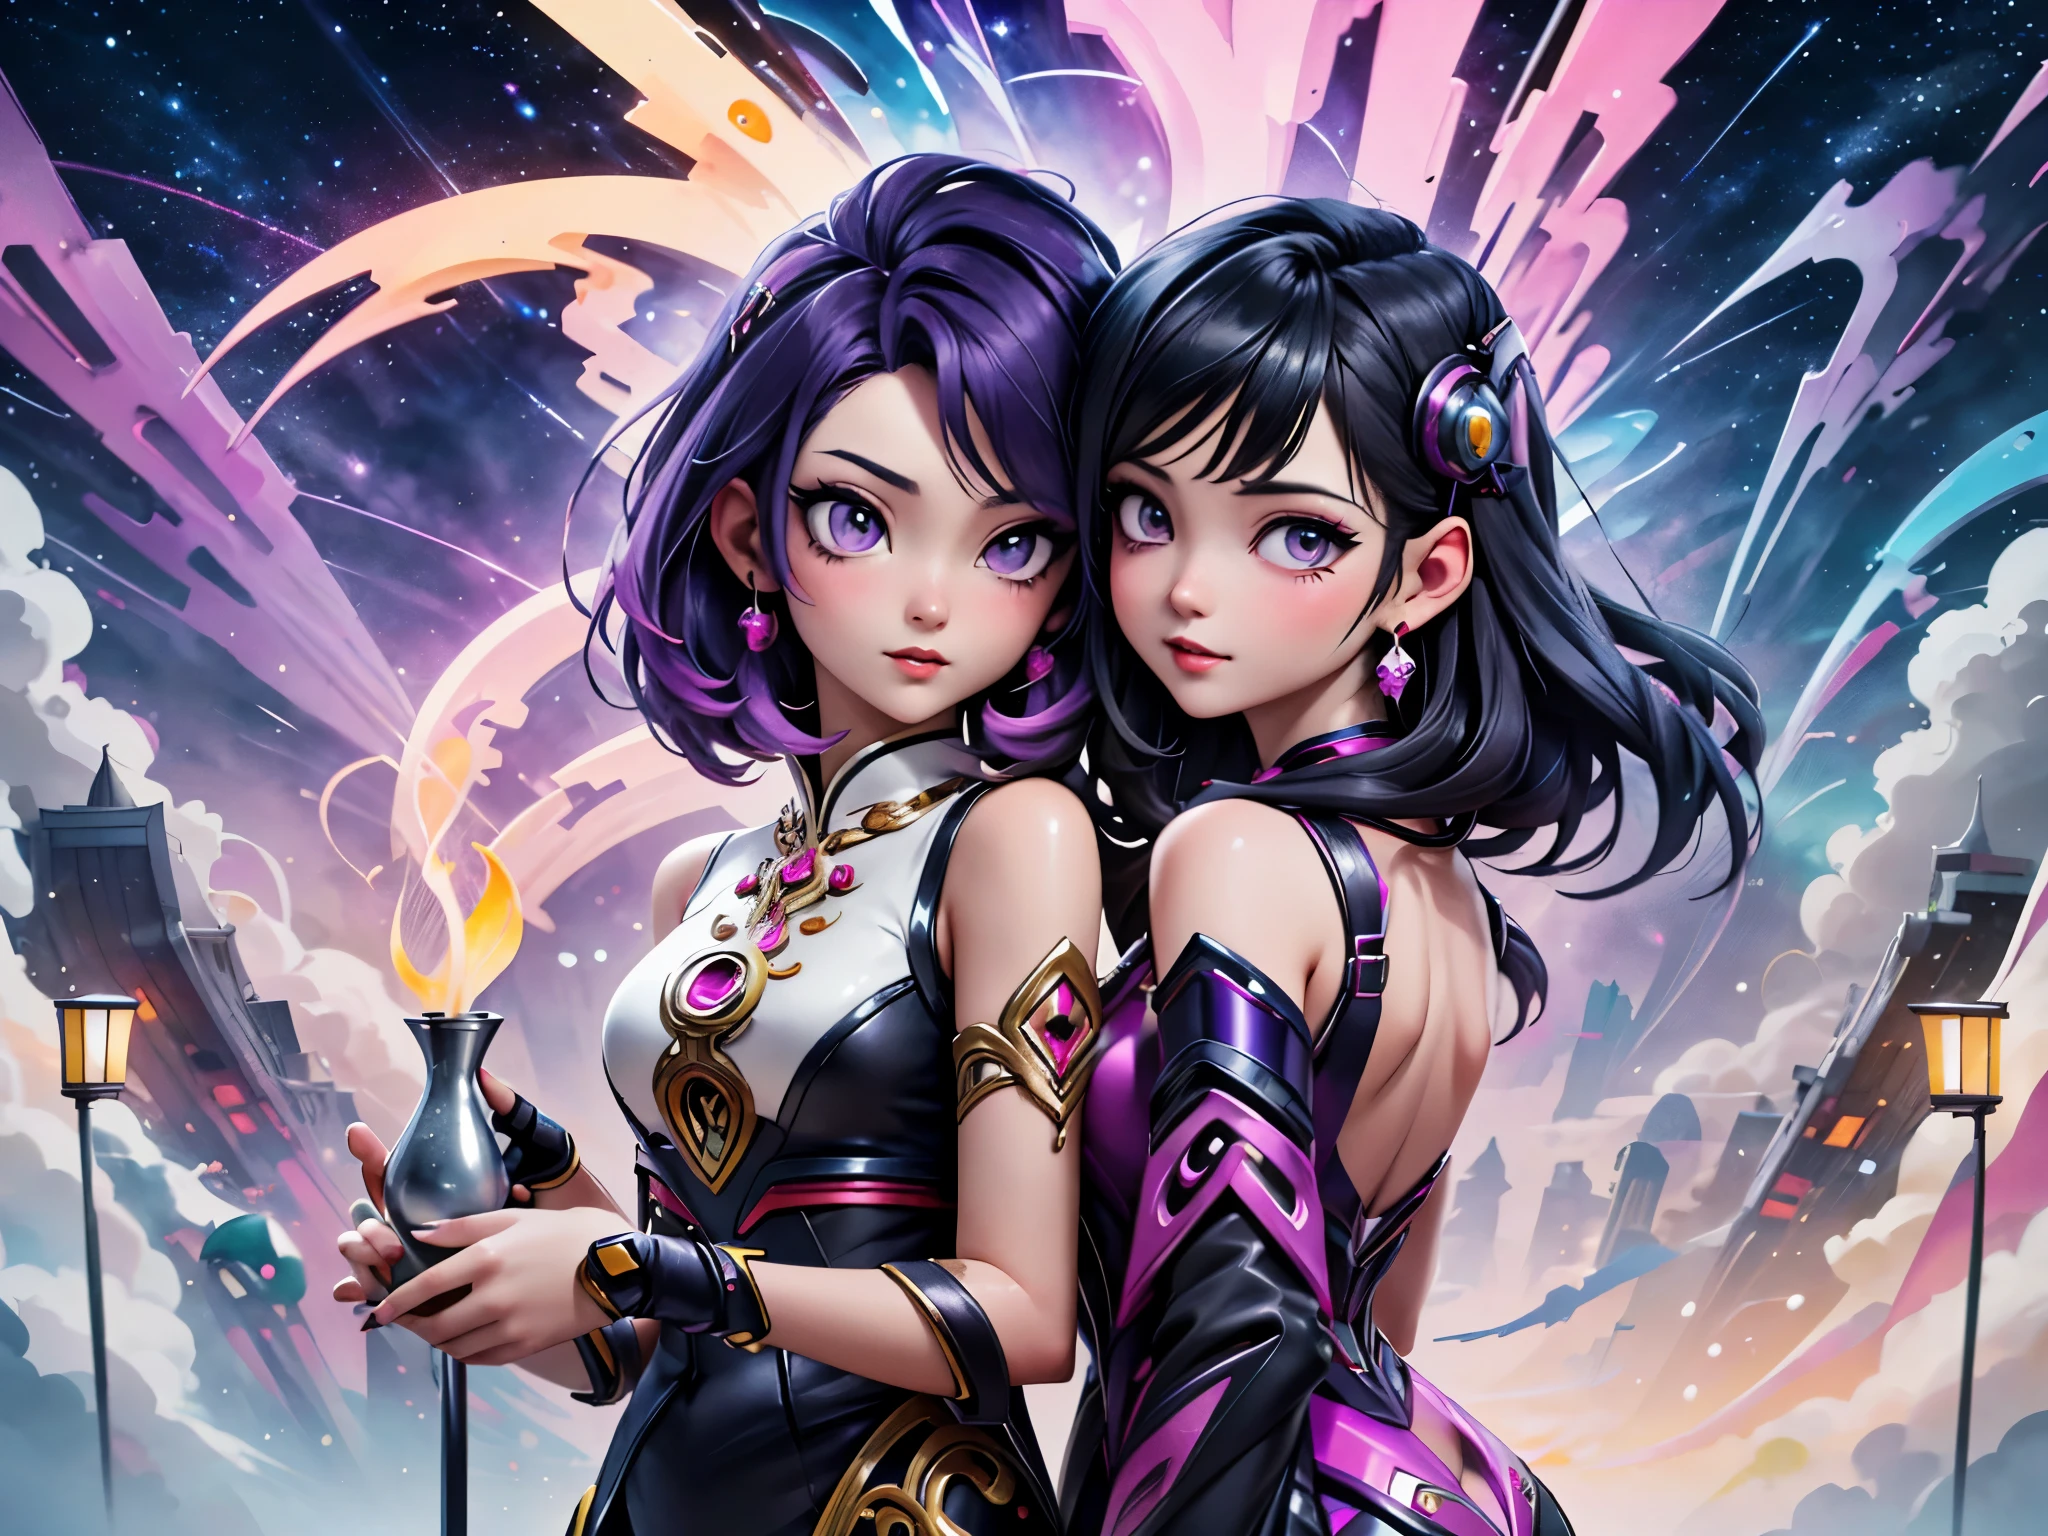 Anime - style illustration of two women with purple hair and black hair., Beautiful sisters in traditional Thai clothing, wearing black and pink sashes., Arrogant demeanor, Magnificent and majestic, Steam Punk City on Background, Detailed digital anime art, Gouache style art, artgerm artgerm and wlop, Argerm style, High quality 8k detailed artwork. , There is a Cyber Punk skyscraper in the background., Aurora, Crescent moon, Many shooting stars in the sky, Loy Krathong Festival,Chiang Mai , Lanna style, night time, full moon, Many floating lanterns in the sky, Thai architecture 2D , faded picture ,vintage color, lined, Very high quality work , Very high detail , There are many types combined.... , Animation, 4k, attitude, vintage style , Thailand